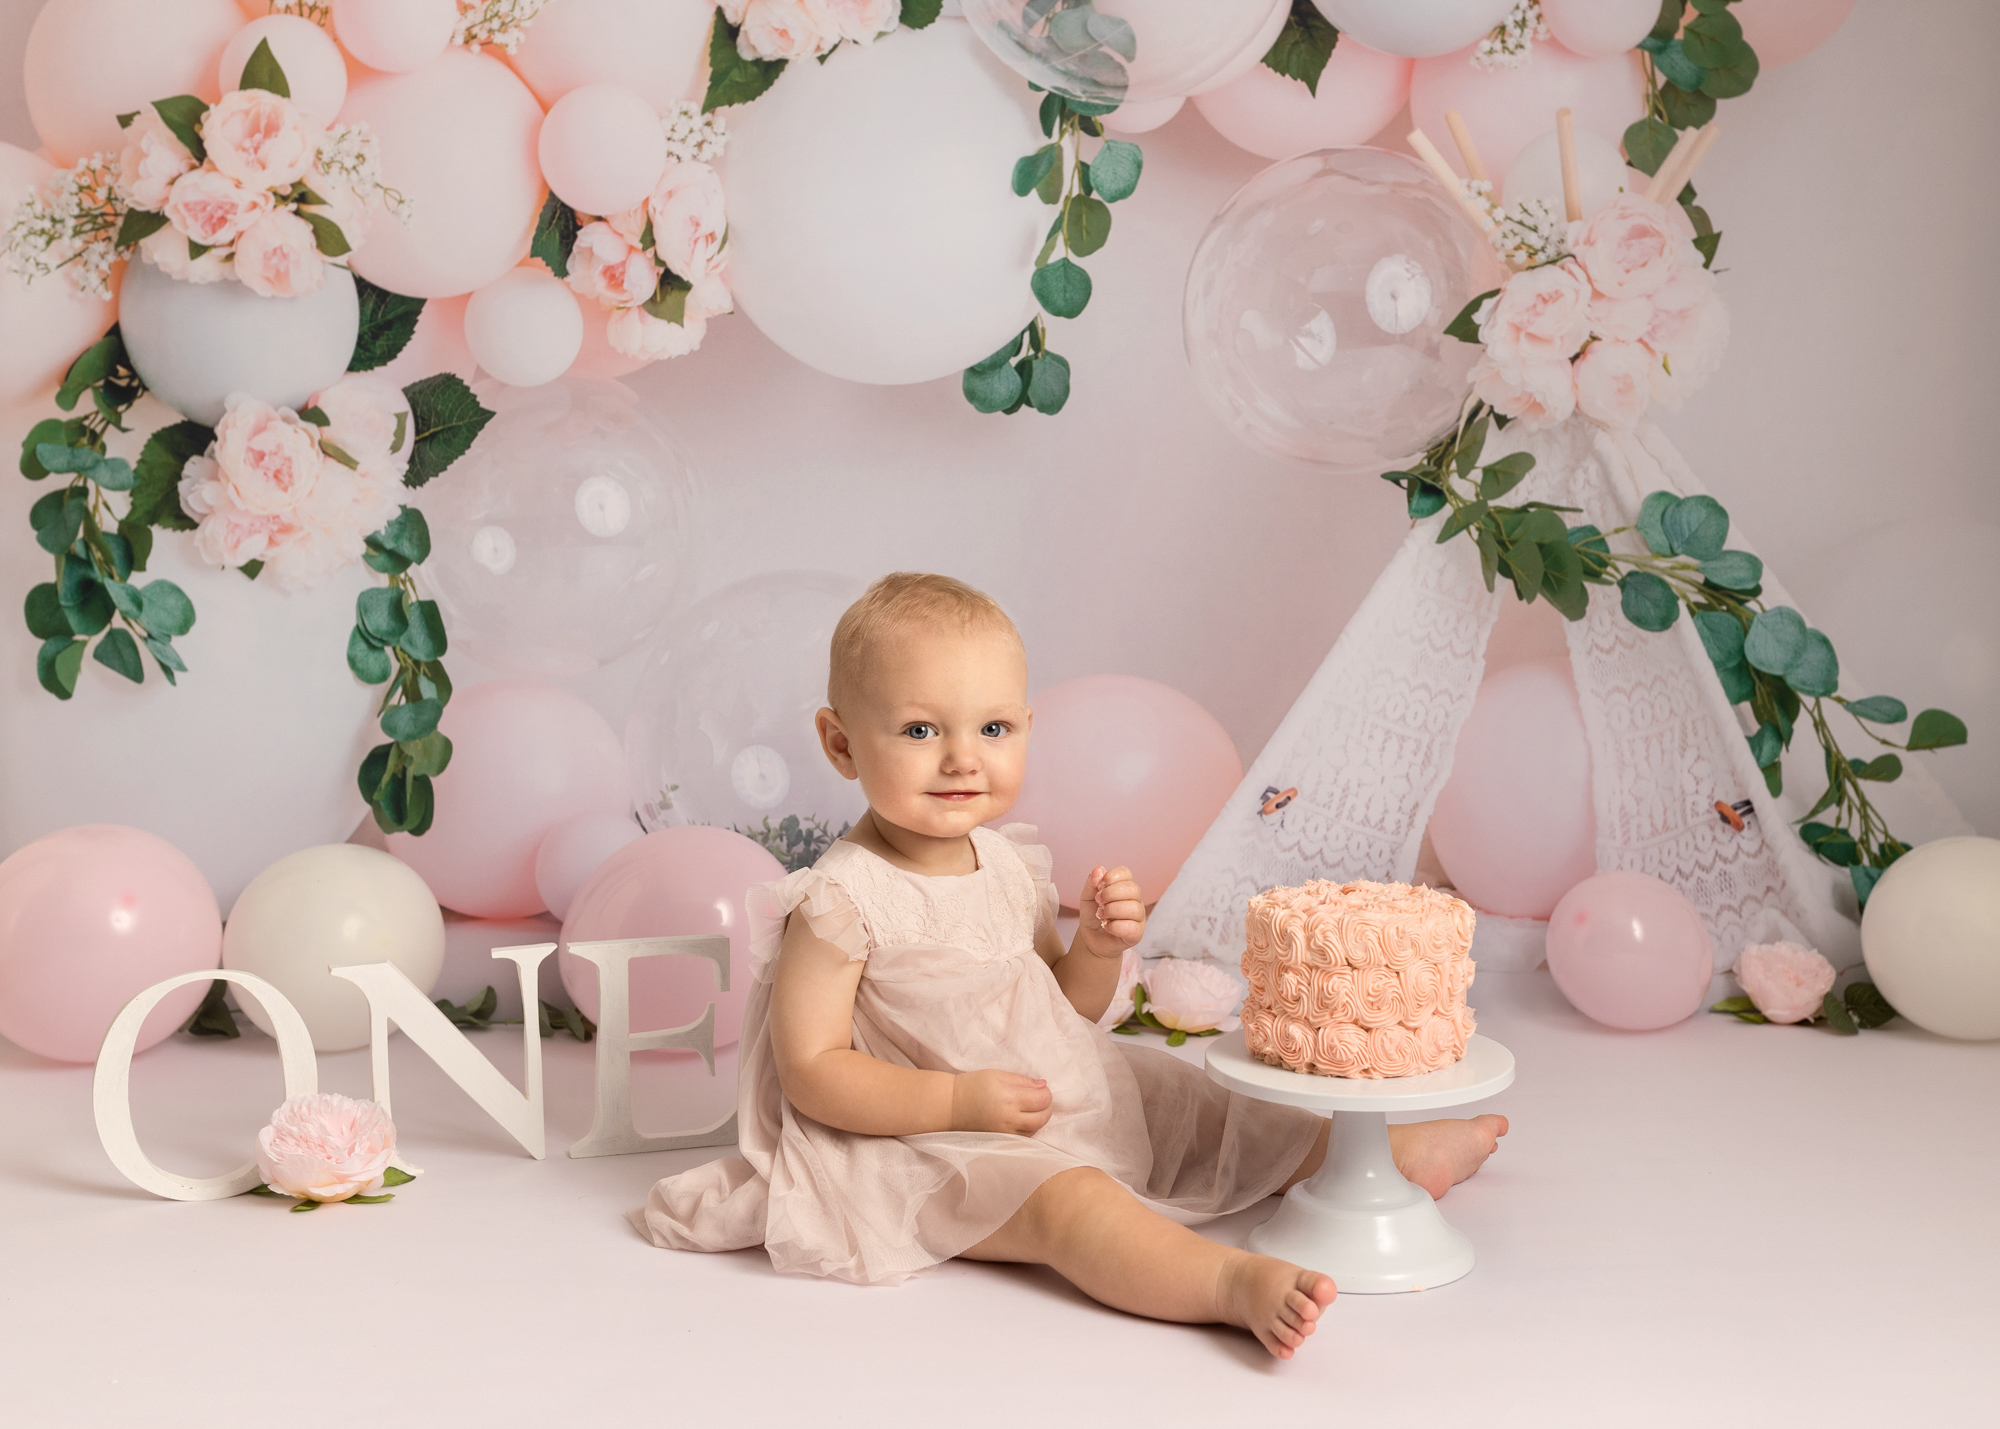 Baby girl eating cake off a wooden spoon sat next to a rainbow cake and rainbow balloon arch during cake smash photoshoot in Kent